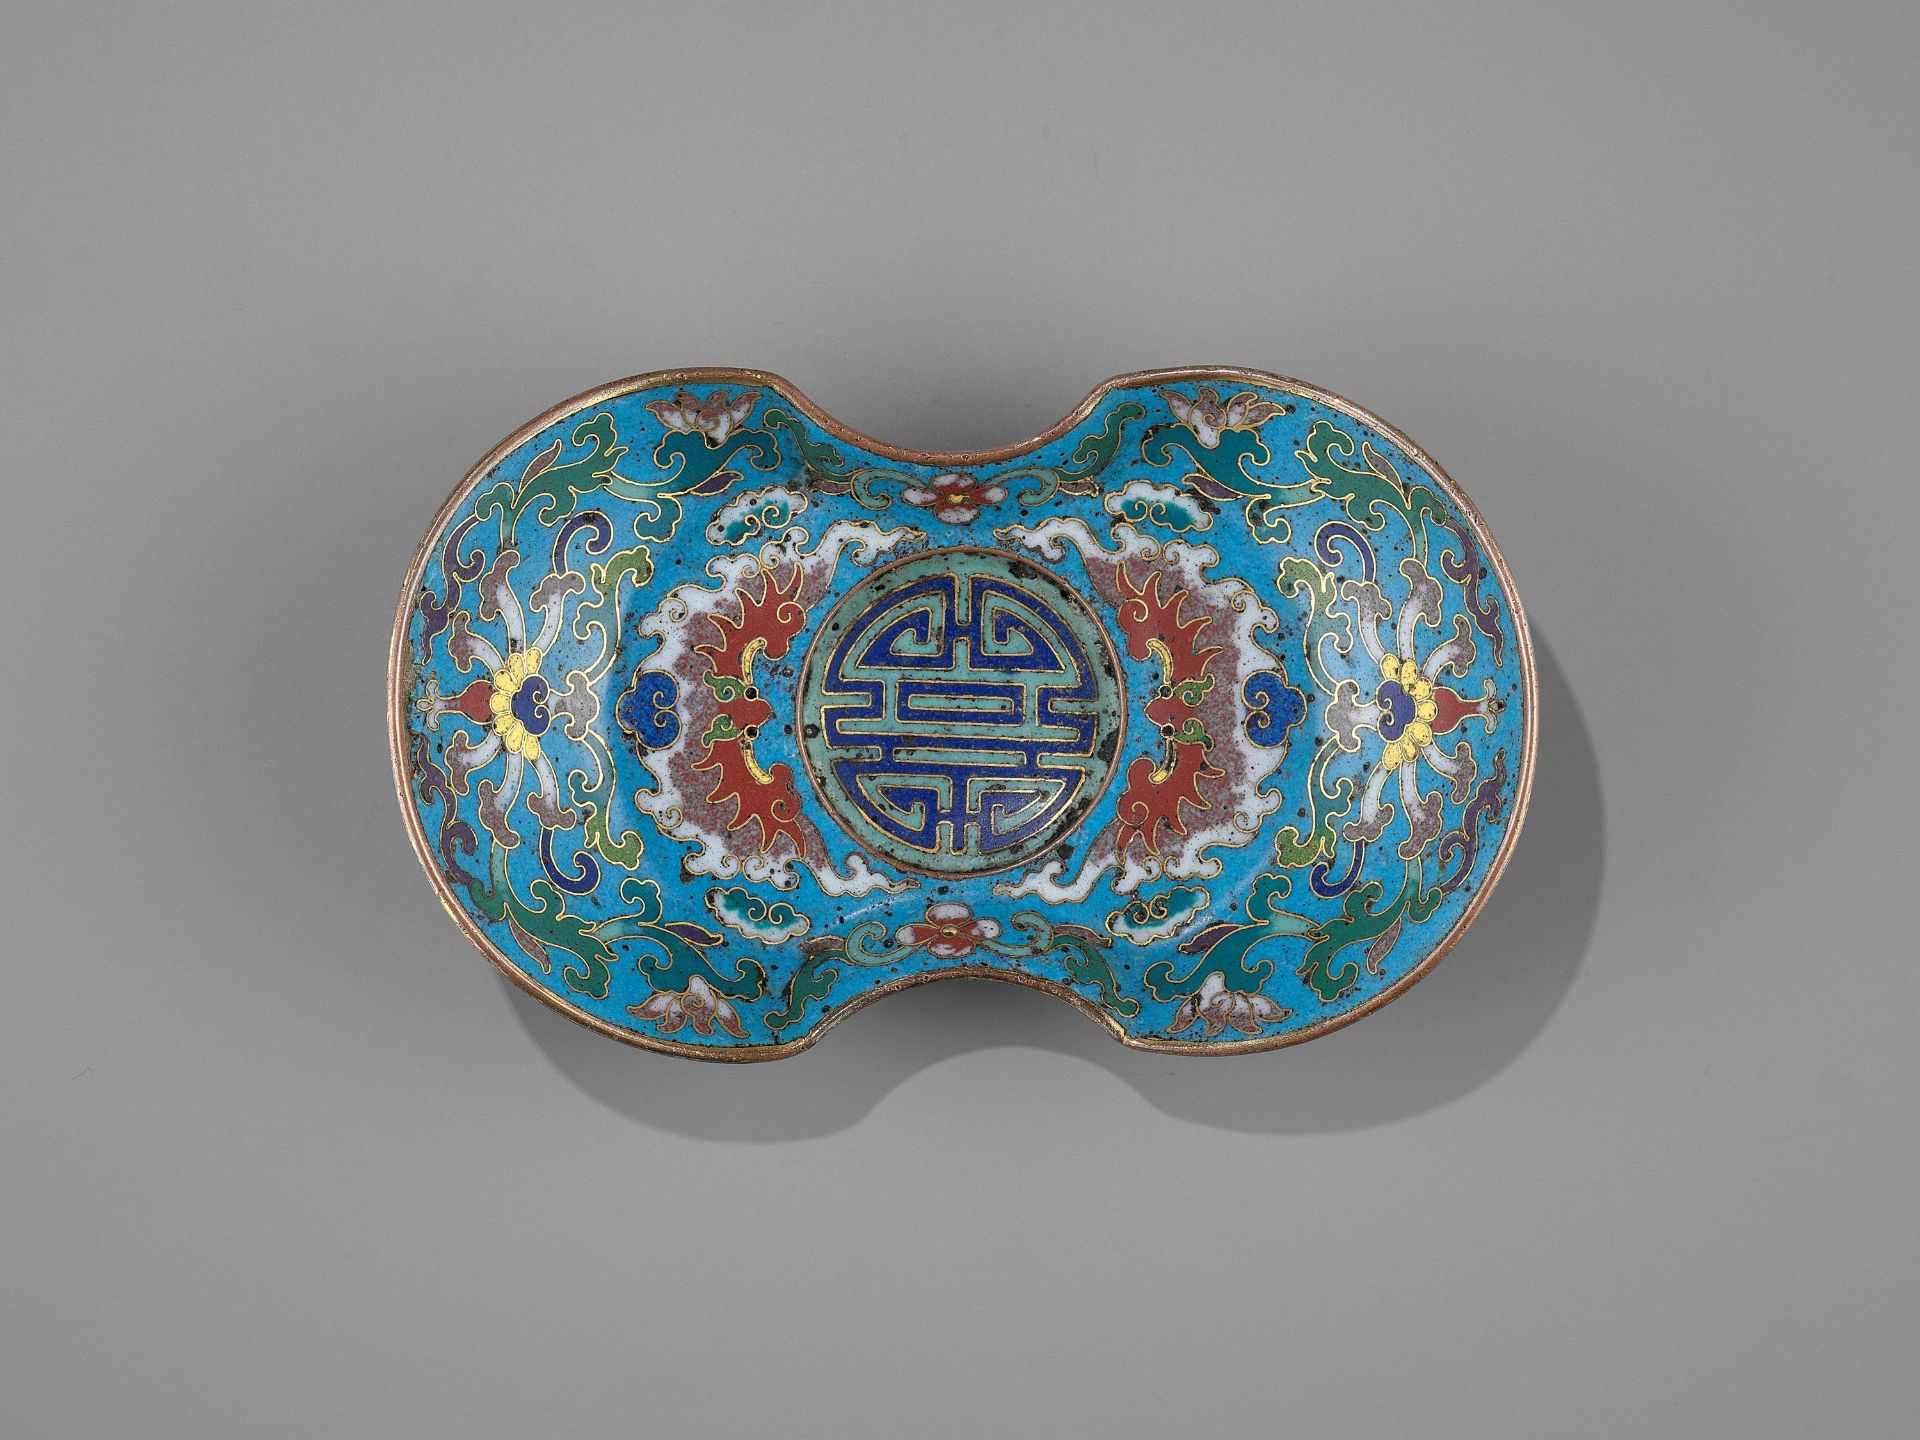 A CLOISONNE AND GILT-BRONZE 'DOUBLE HAPPINESS' CUP STAND, QIANLONG